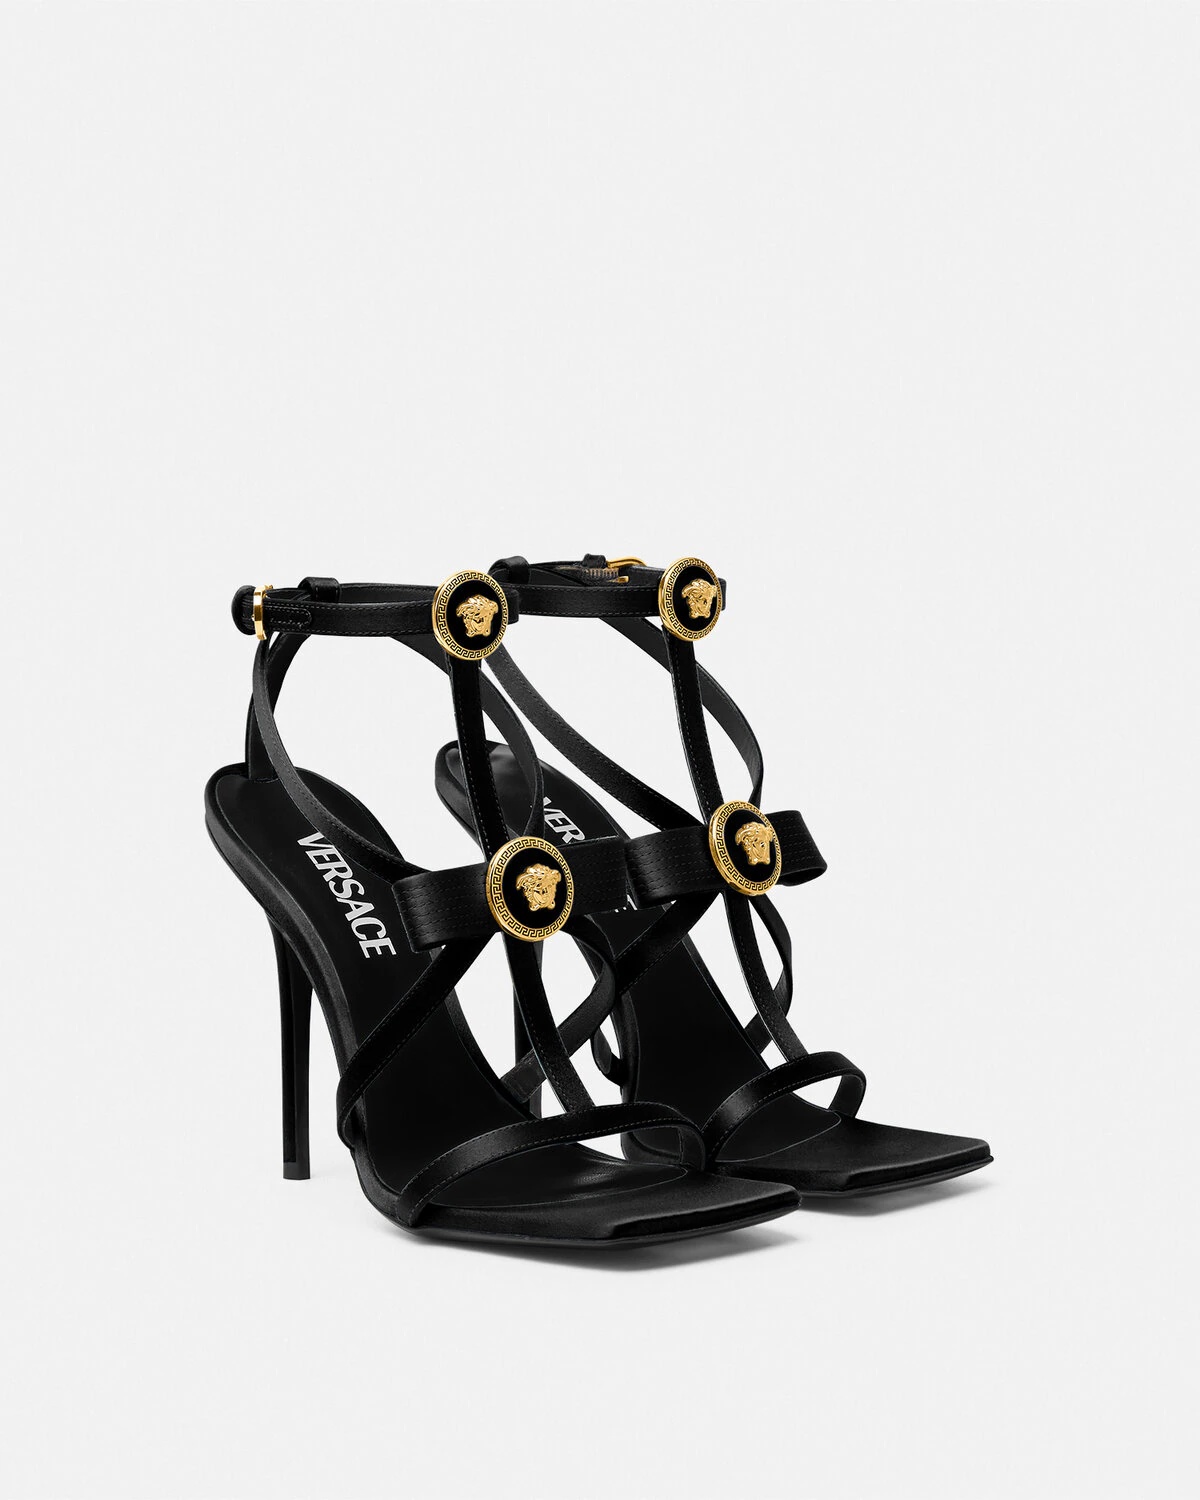 Gianni Ribbon Satin Cage Sandals 110 mm - 2